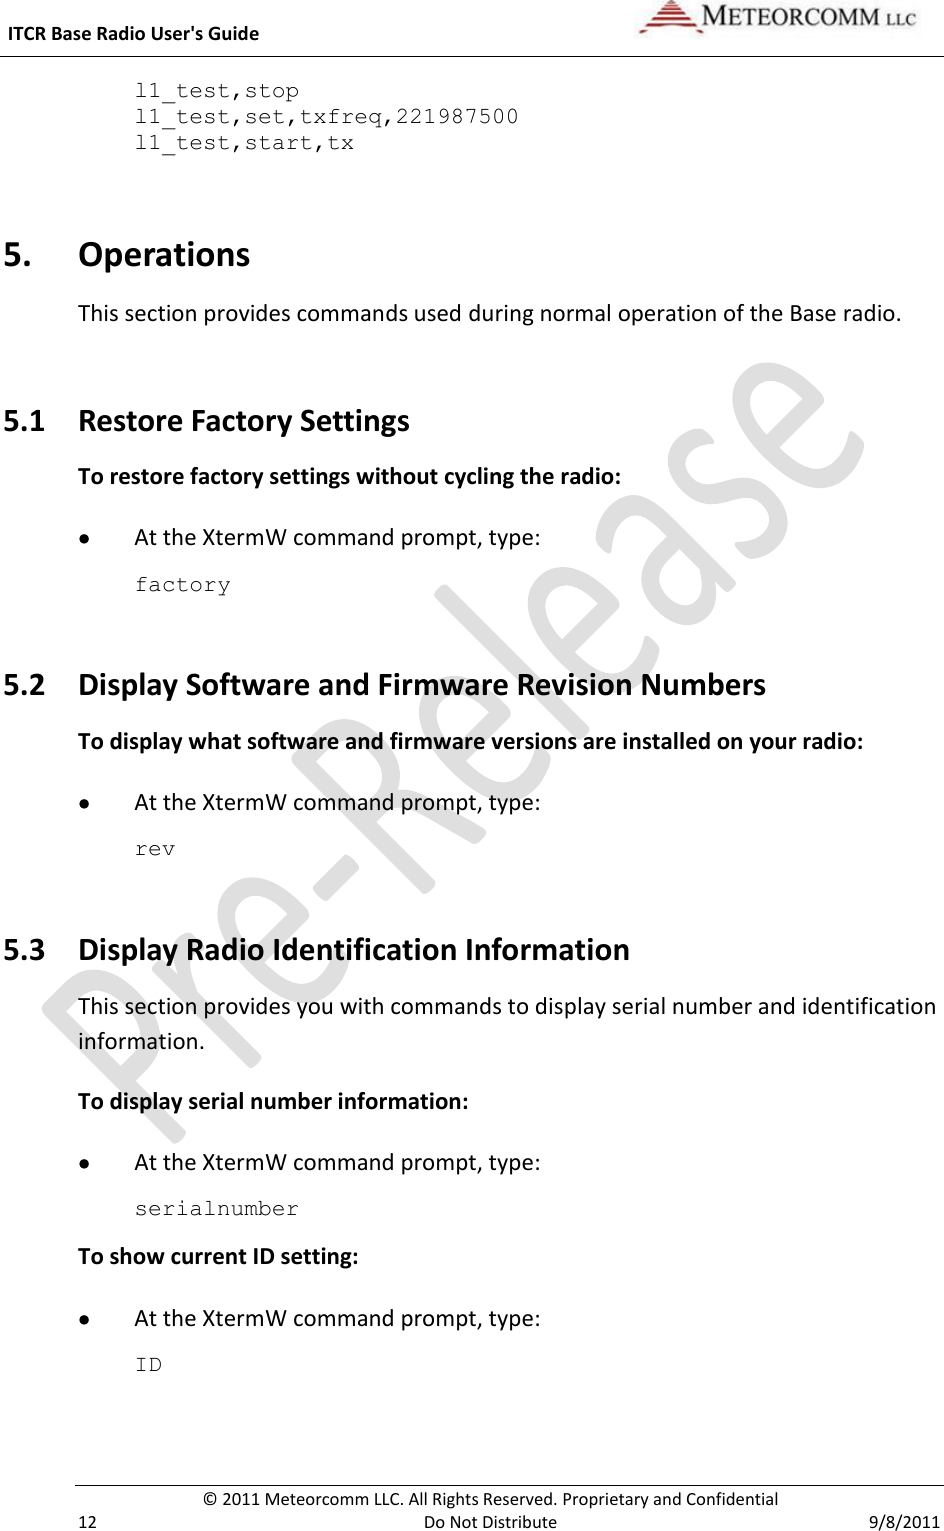  ITCR Base Radio User&apos;s Guide     © 2011 Meteorcomm LLC. All Rights Reserved. Proprietary and Confidential   12  Do Not Distribute  9/8/2011 l1_test,stop l1_test,set,txfreq,221987500 l1_test,start,tx   5. Operations This section provides commands used during normal operation of the Base radio.  5.1 Restore Factory Settings To restore factory settings without cycling the radio:  At the XtermW command prompt, type: factory 5.2 Display Software and Firmware Revision Numbers To display what software and firmware versions are installed on your radio:  At the XtermW command prompt, type: rev 5.3 Display Radio Identification Information This section provides you with commands to display serial number and identification information. To display serial number information:  At the XtermW command prompt, type: serialnumber To show current ID setting:  At the XtermW command prompt, type: ID 